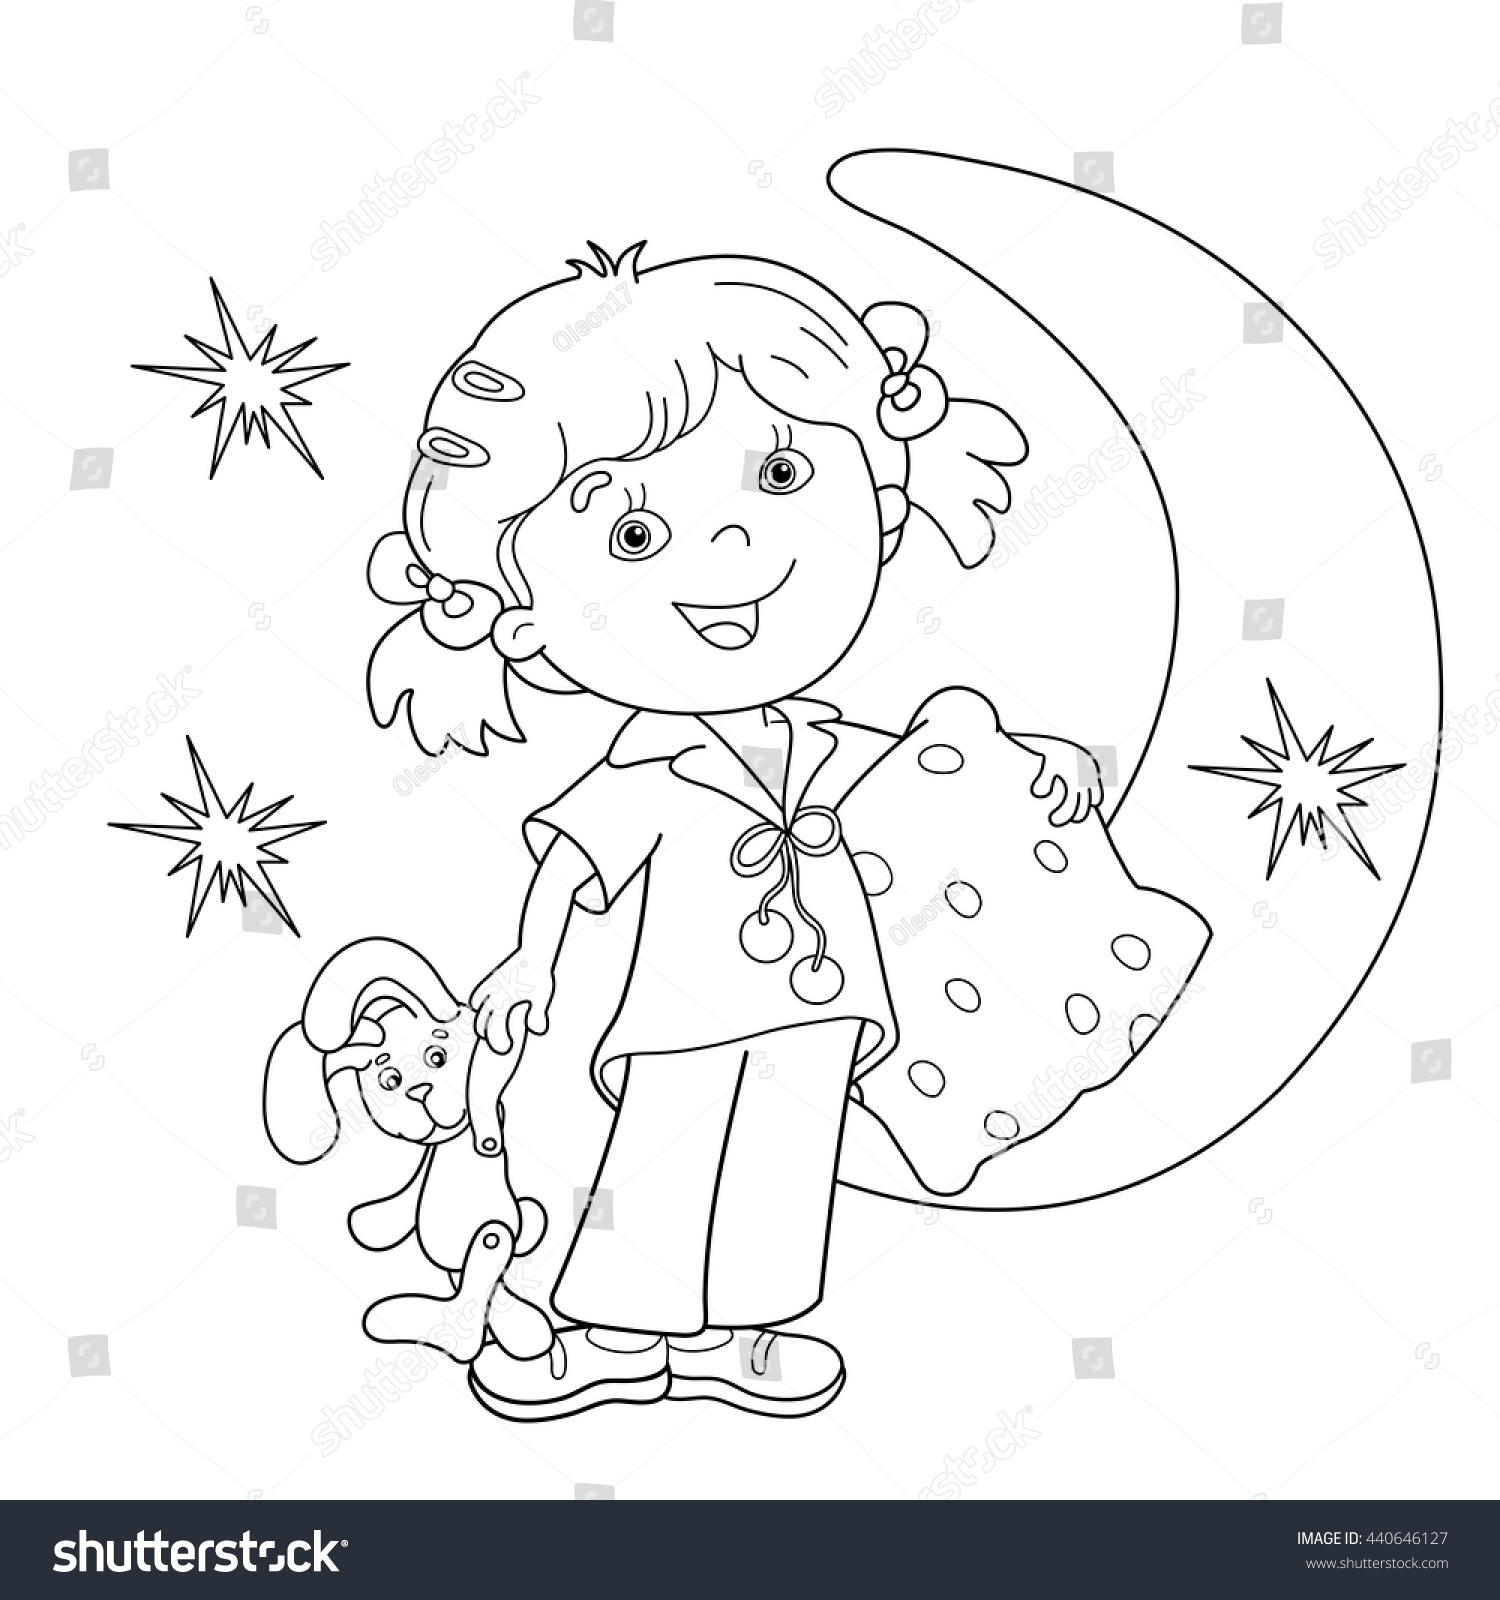 Coloring page outline cartoon girl pajamas stock vector royalty free